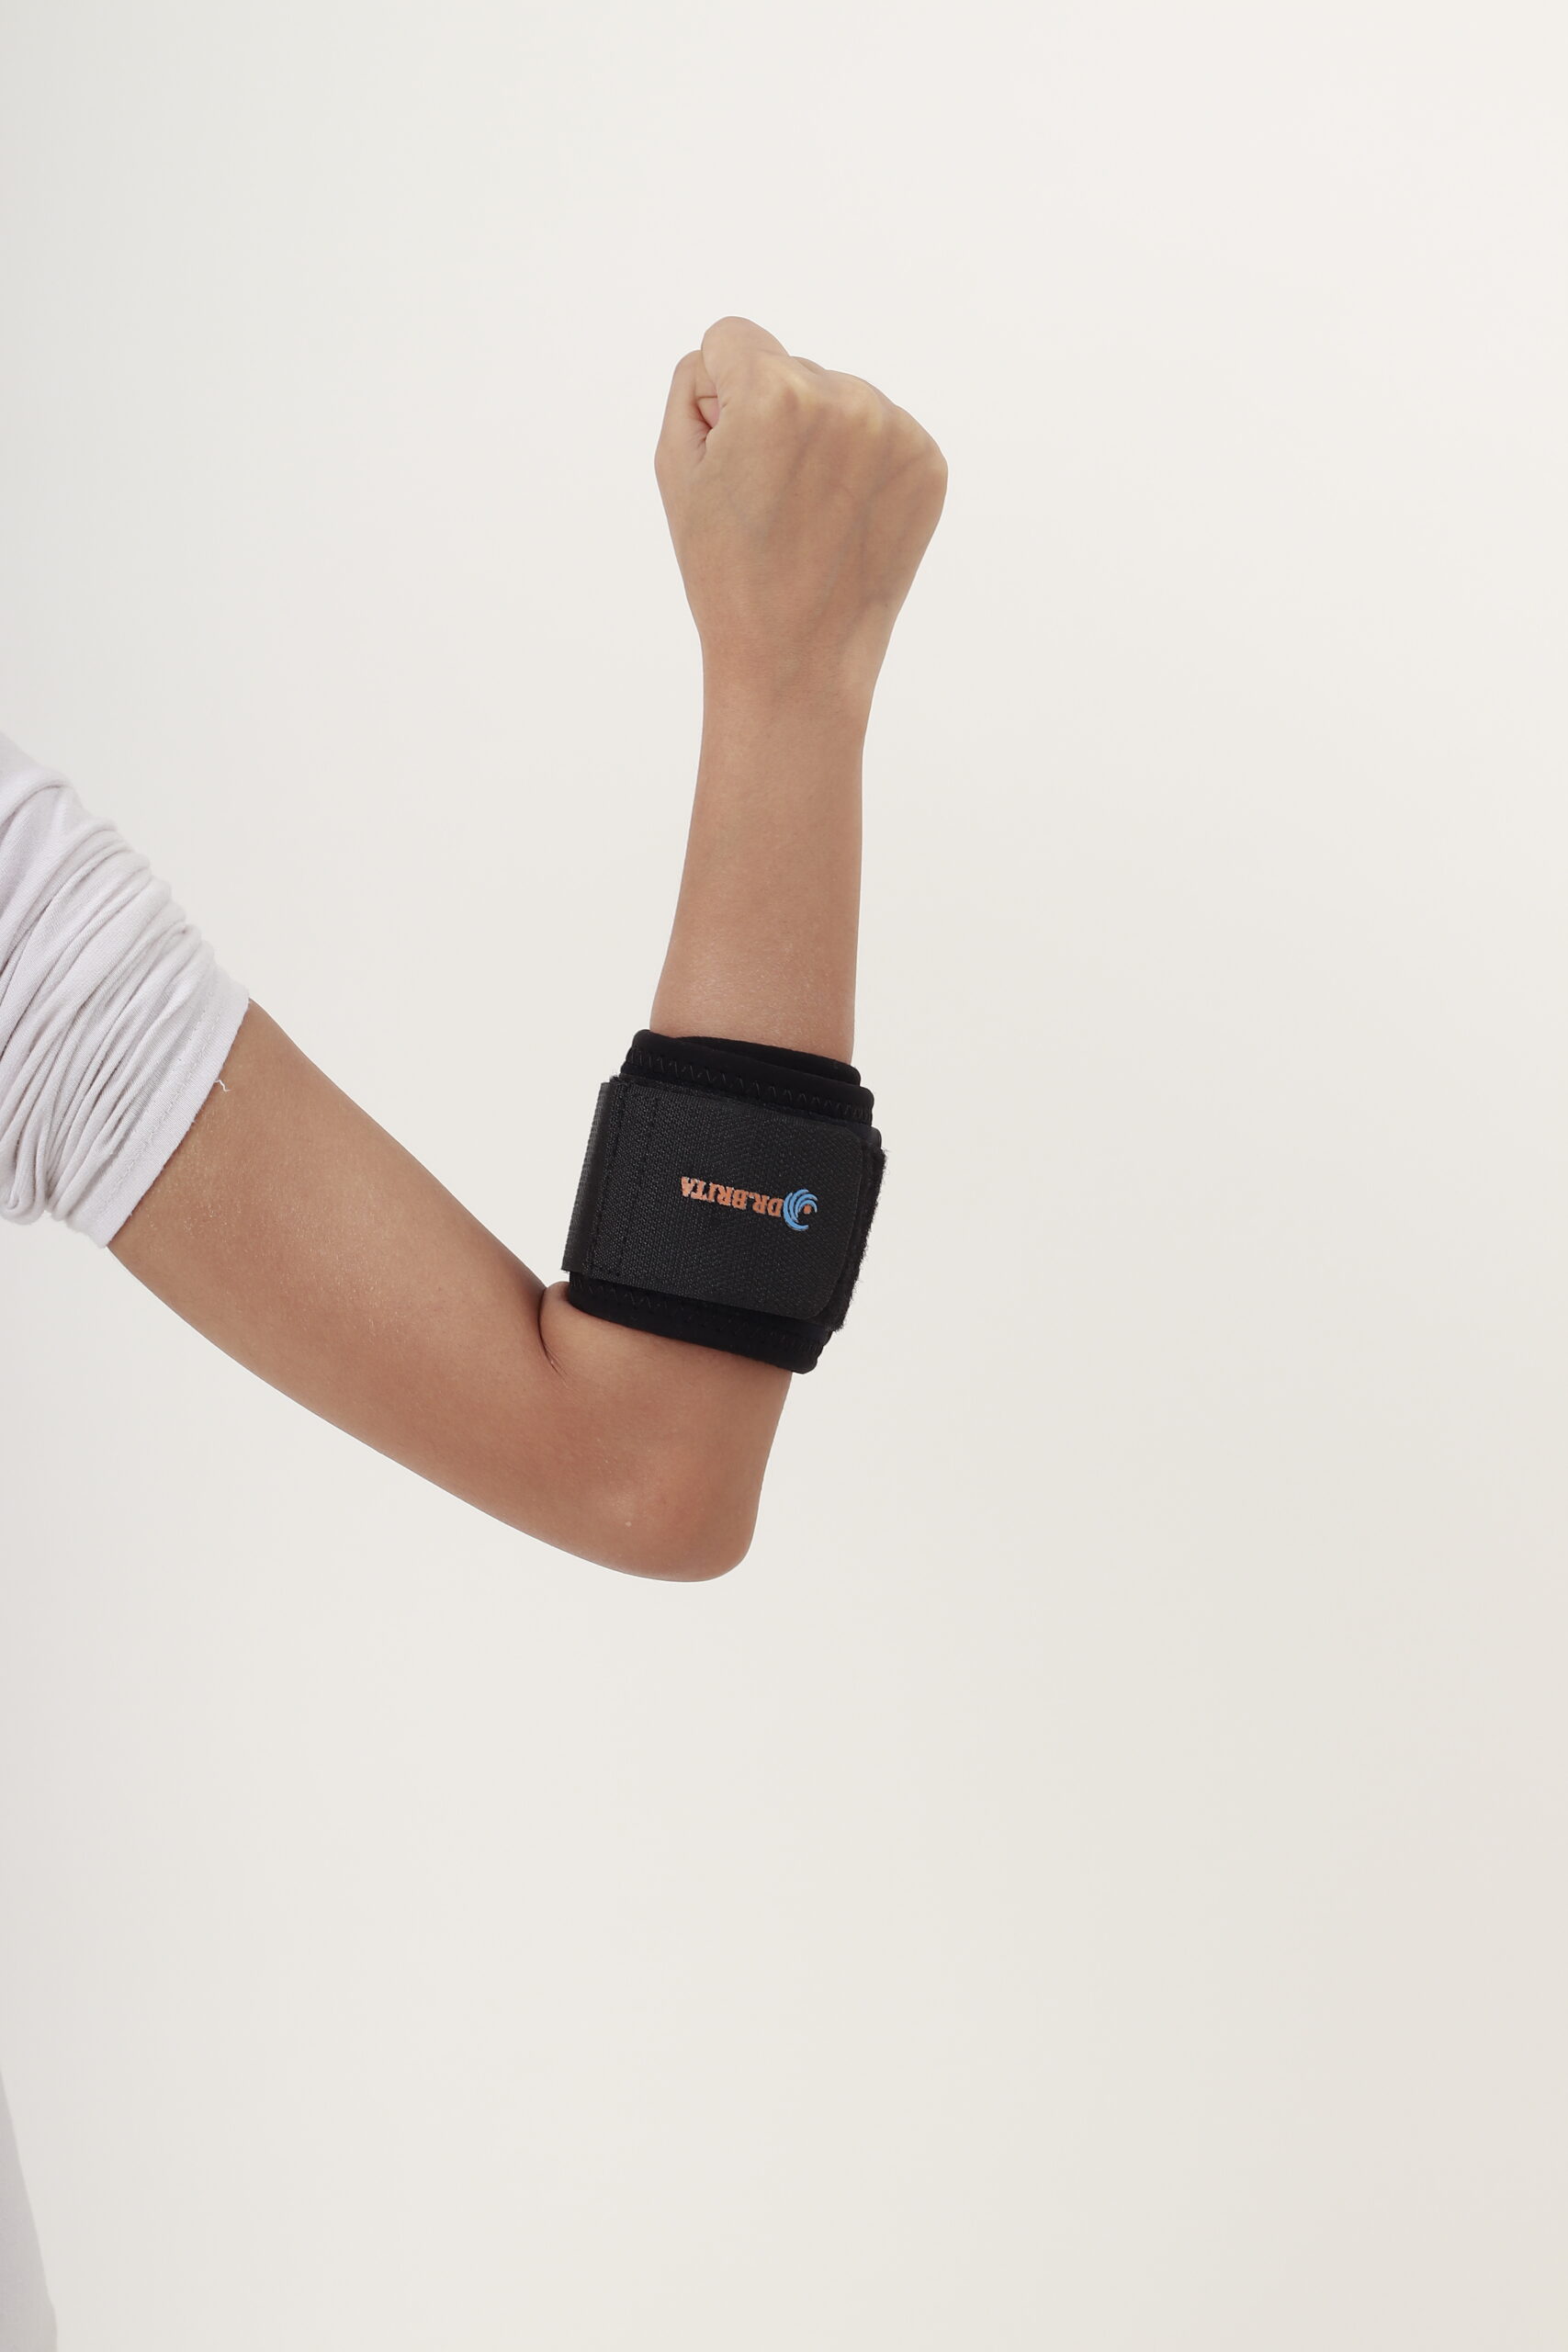 tennis-elbow-support